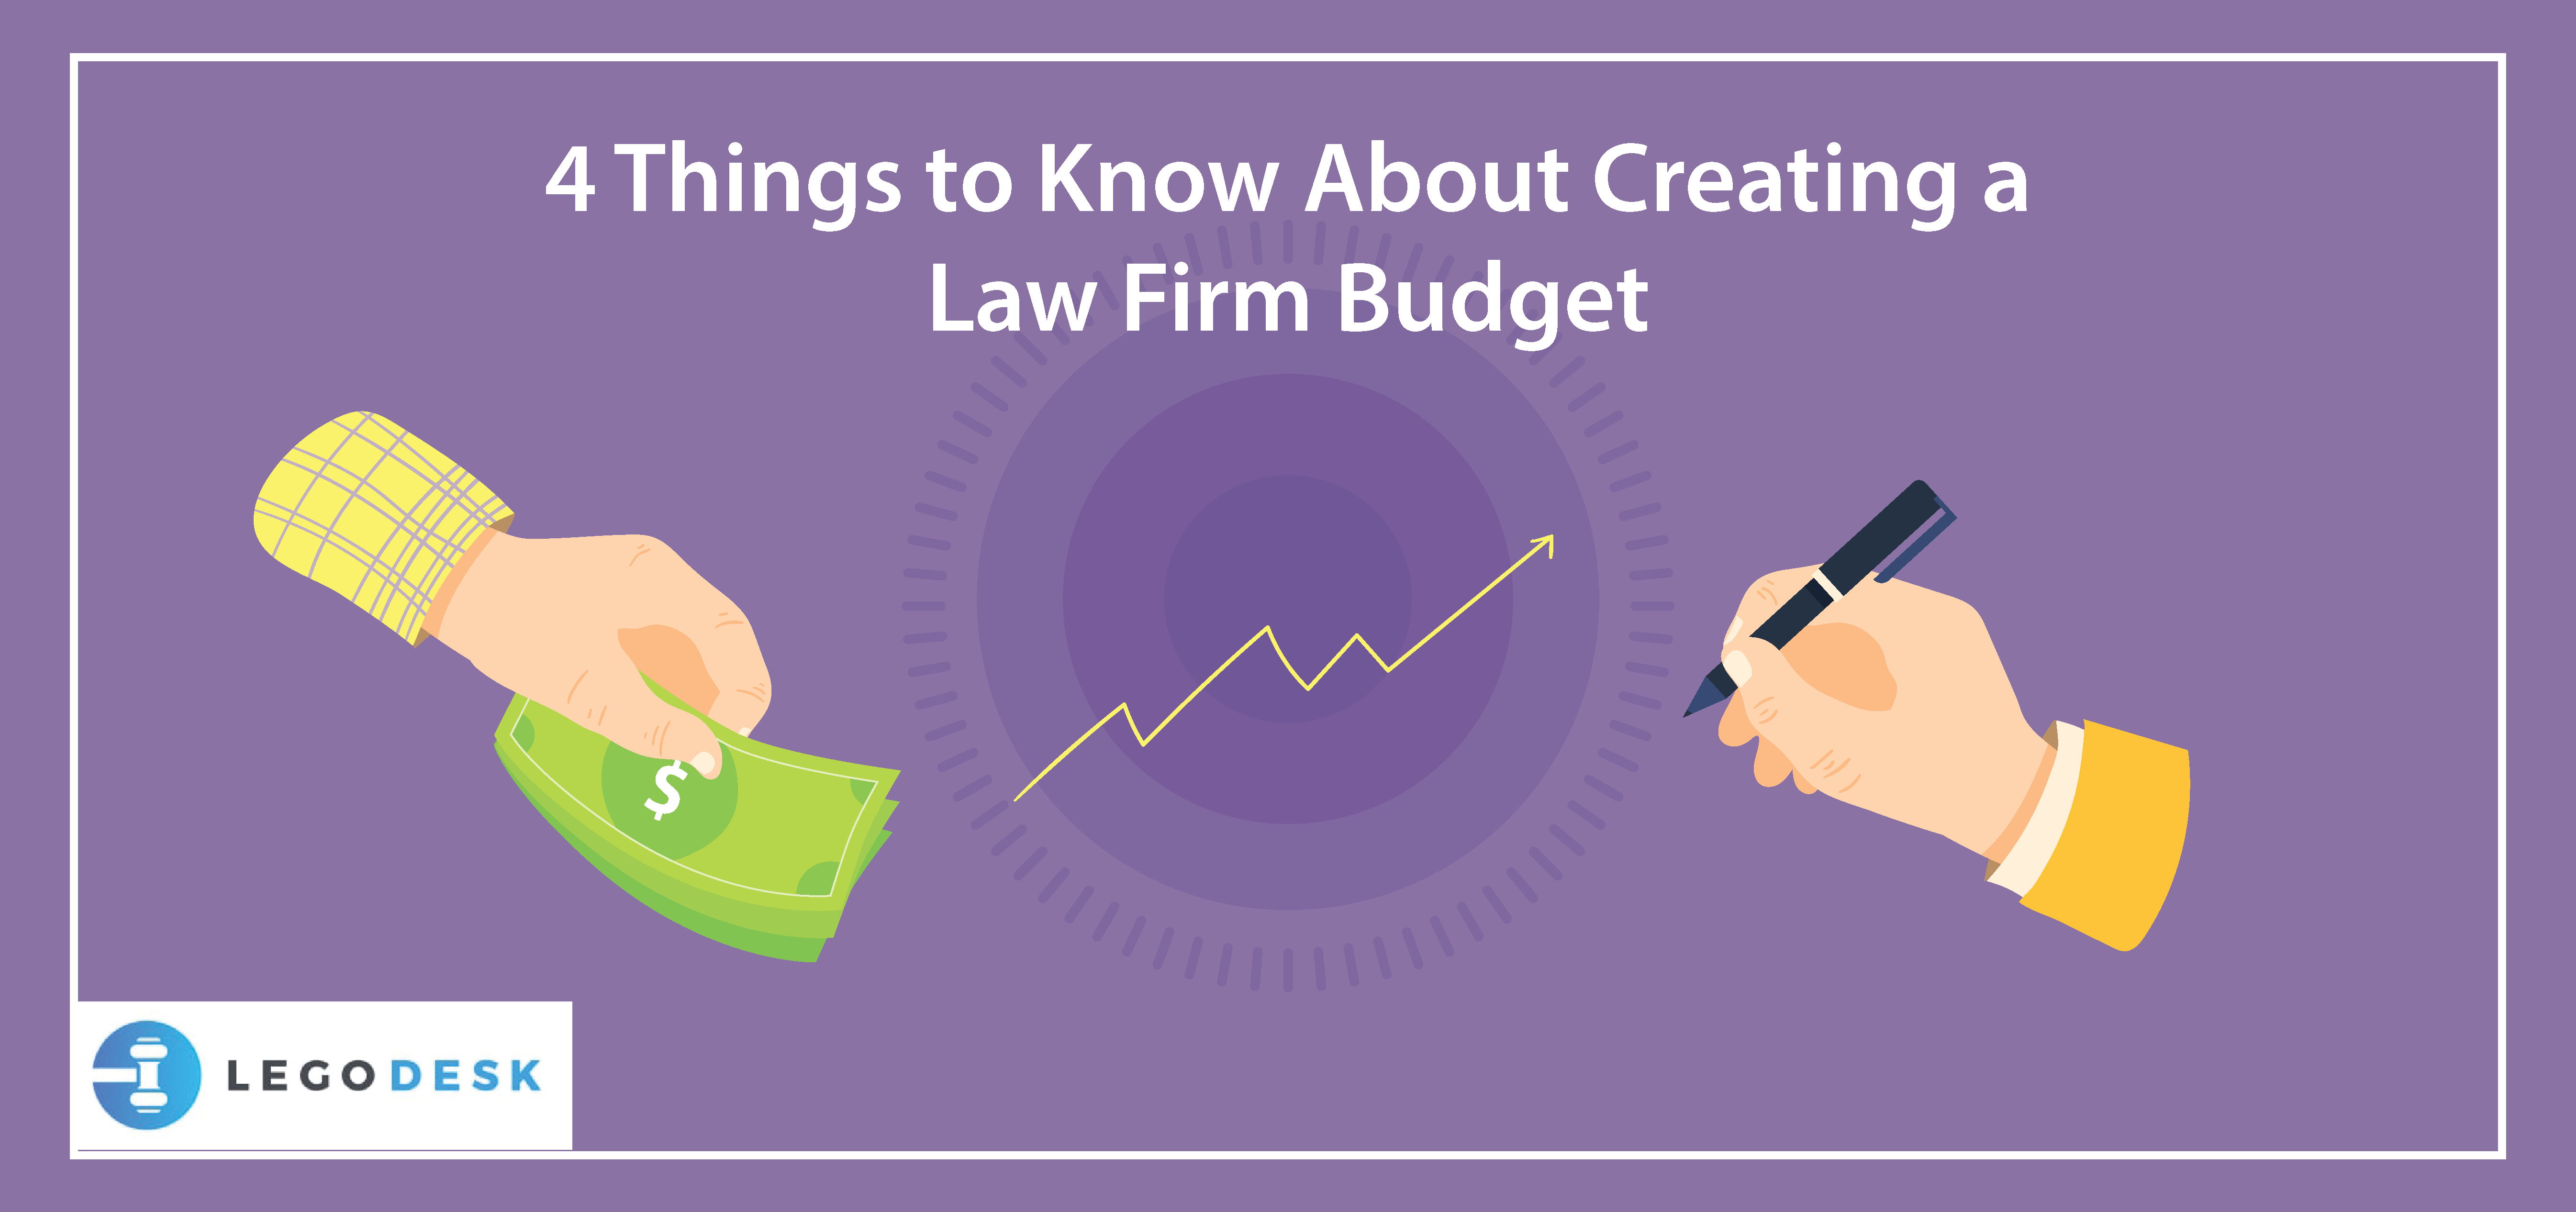 4 Things to Know About Creating a Law Firm Budget